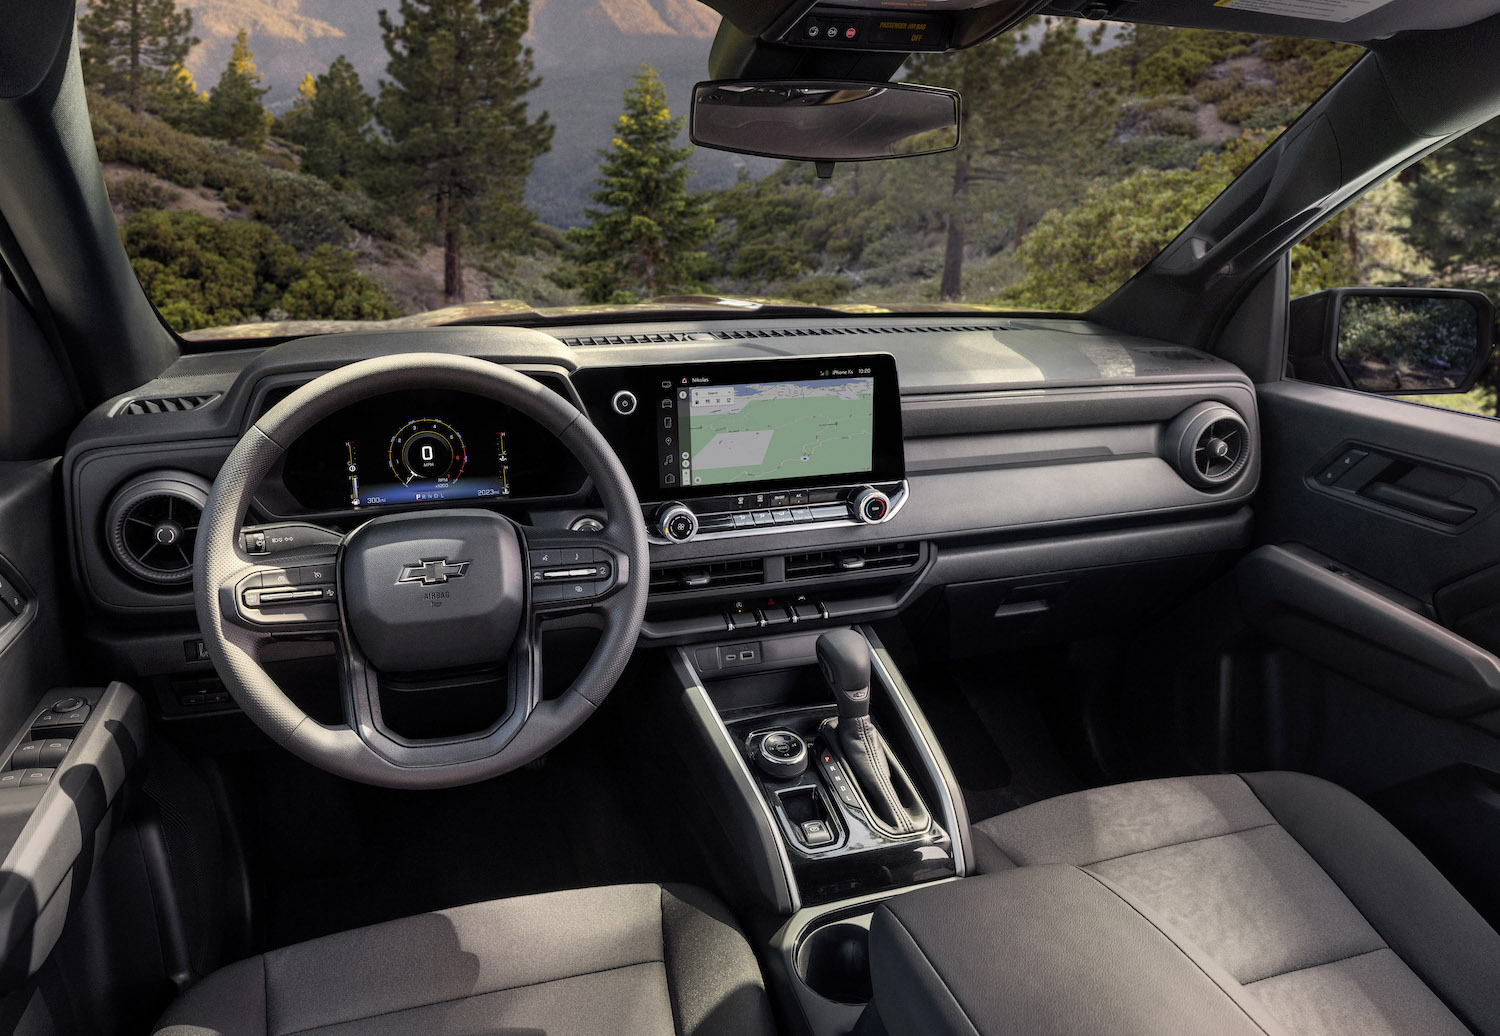 2023 Chevrolet Colorado Interior on the Trail Boss with trees in the back ground.